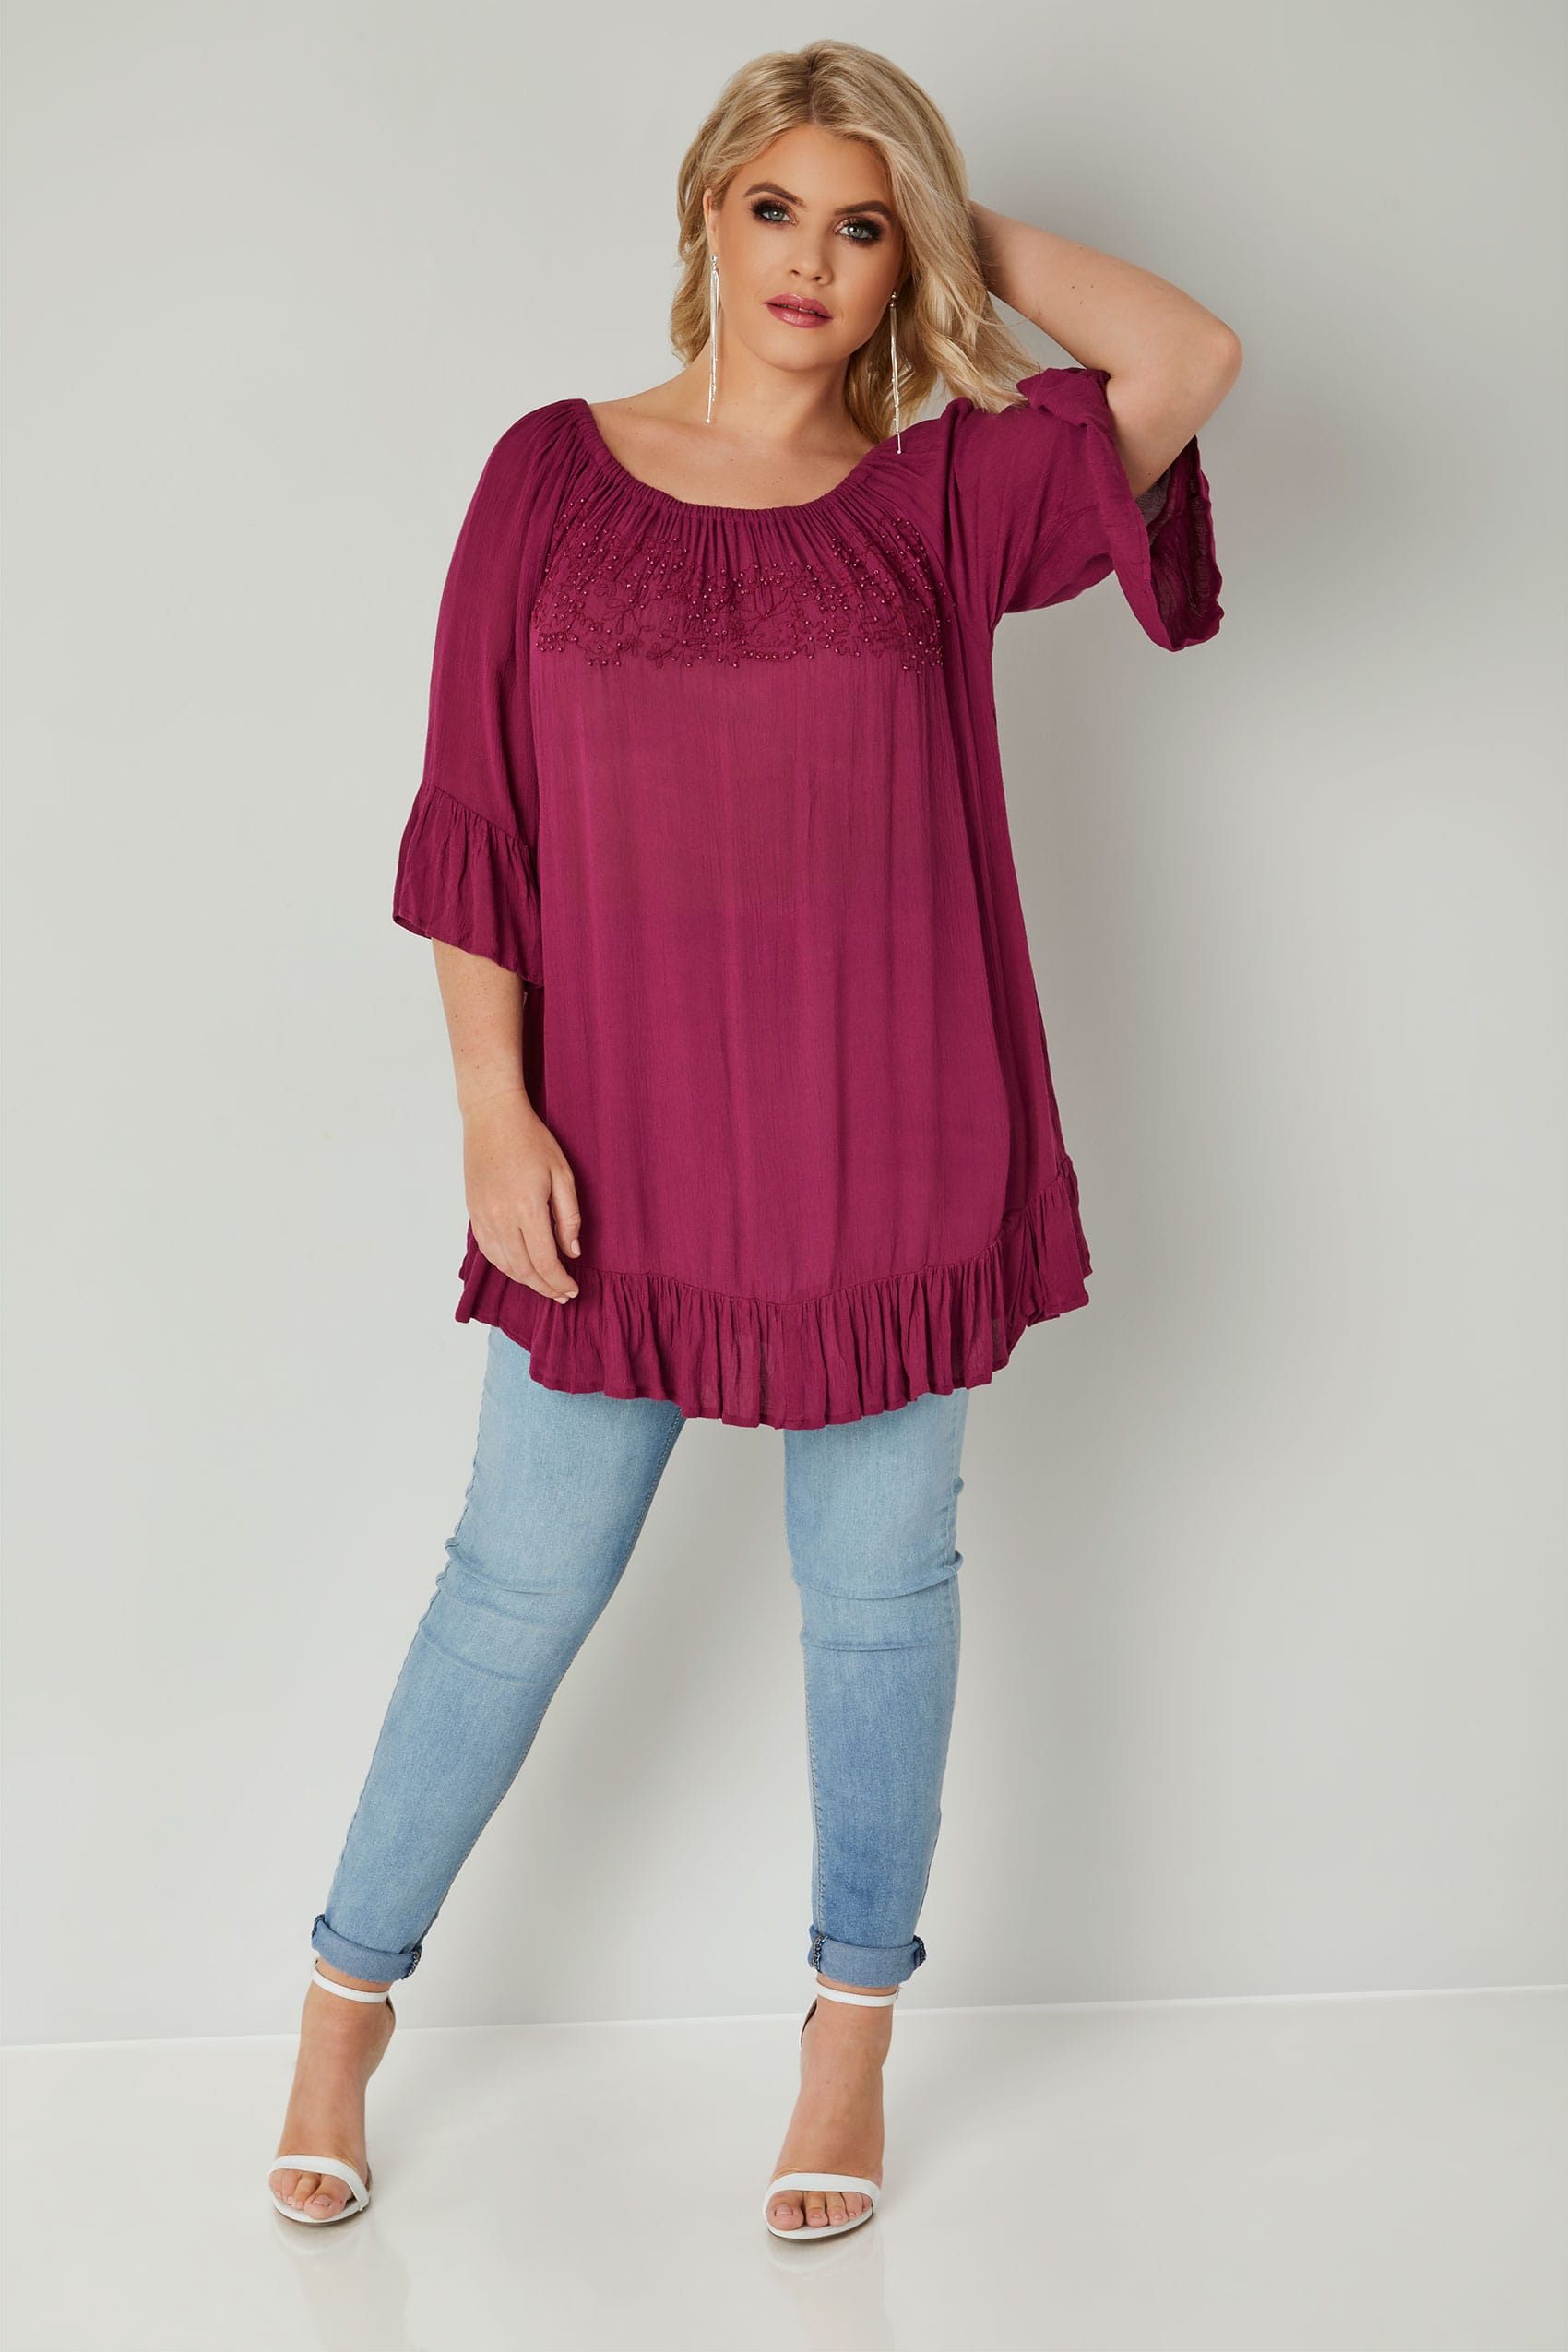 Burgundy Bardot Gypsy Top With Beaded Details & Flute Sleeves, Plus ...